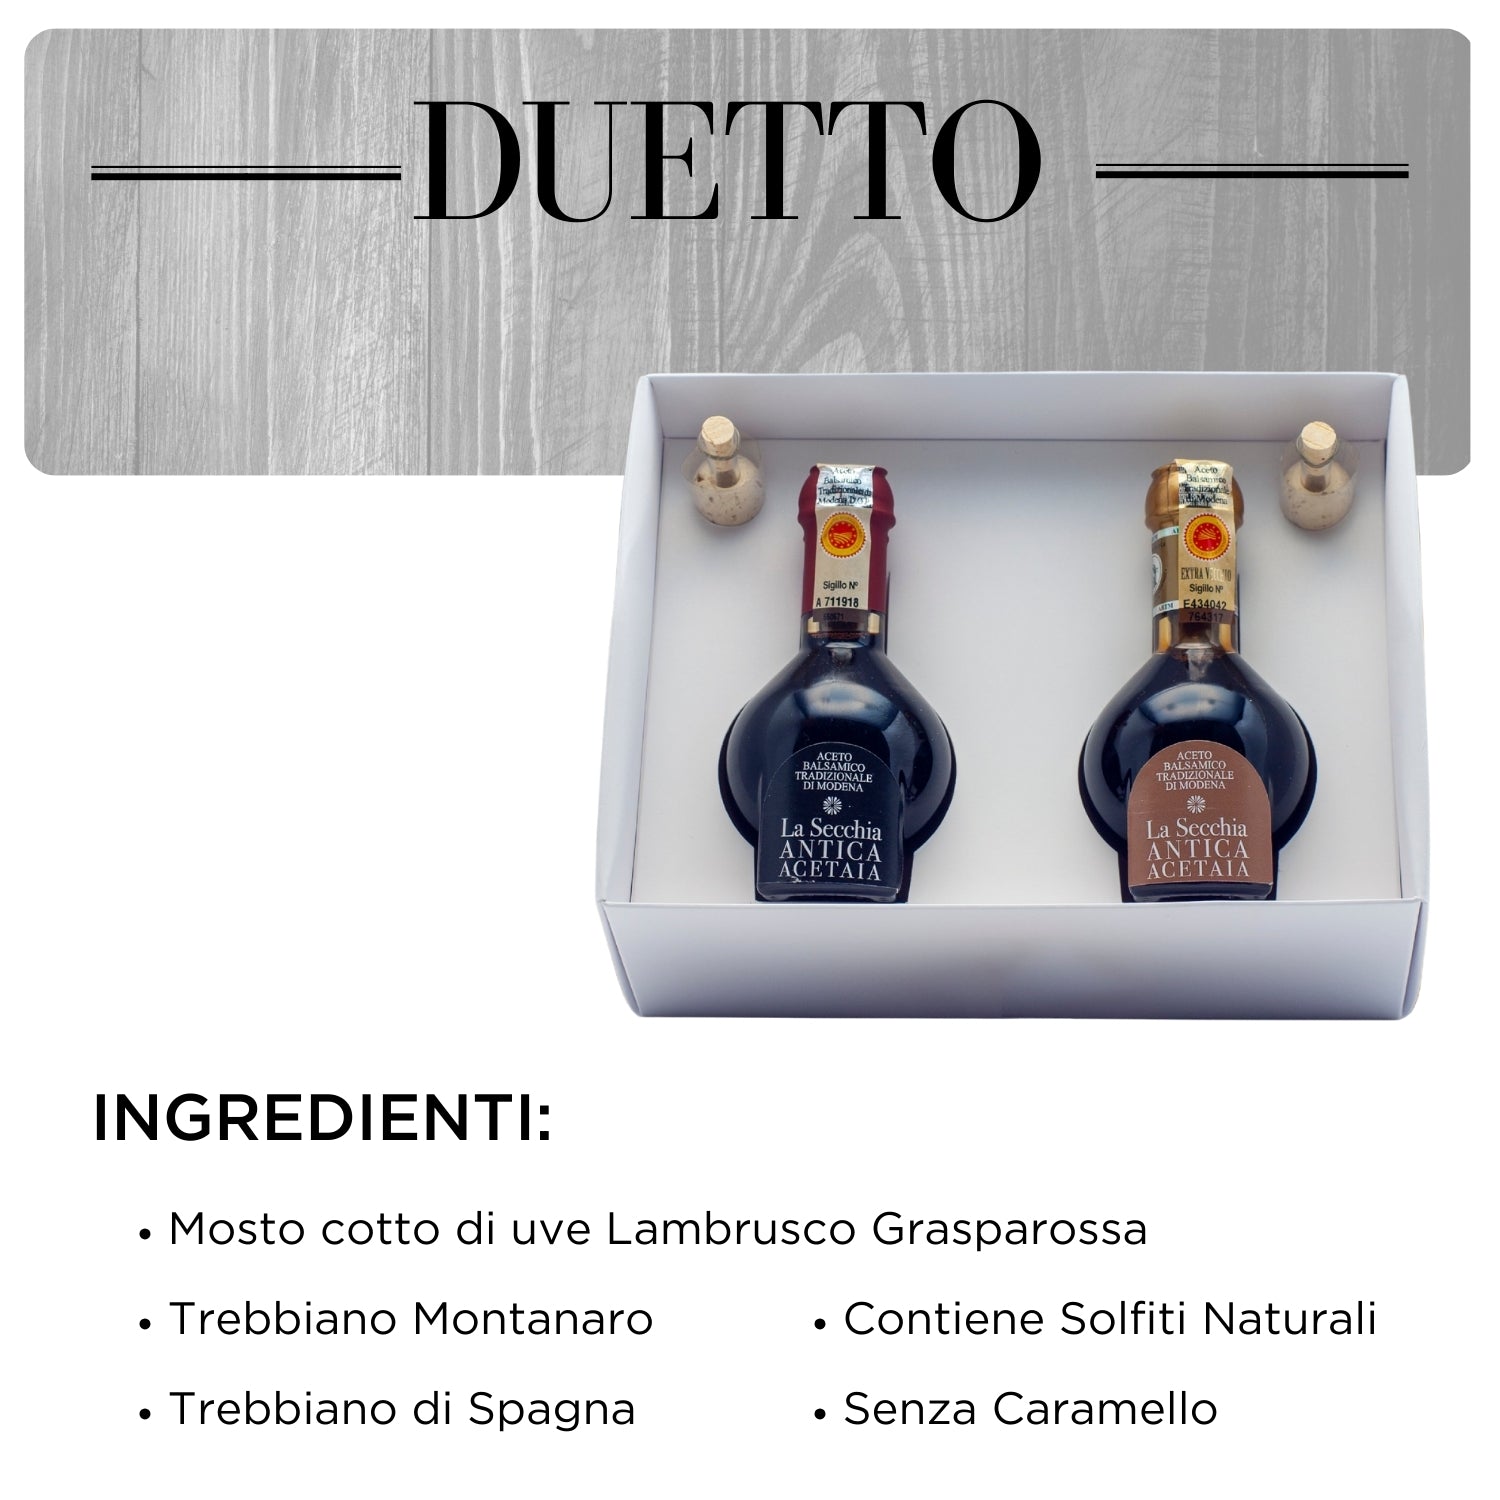 Traditional Balsamic Vinegar of Modena DOP DUETTO "EXTRAGED + REFINED" 